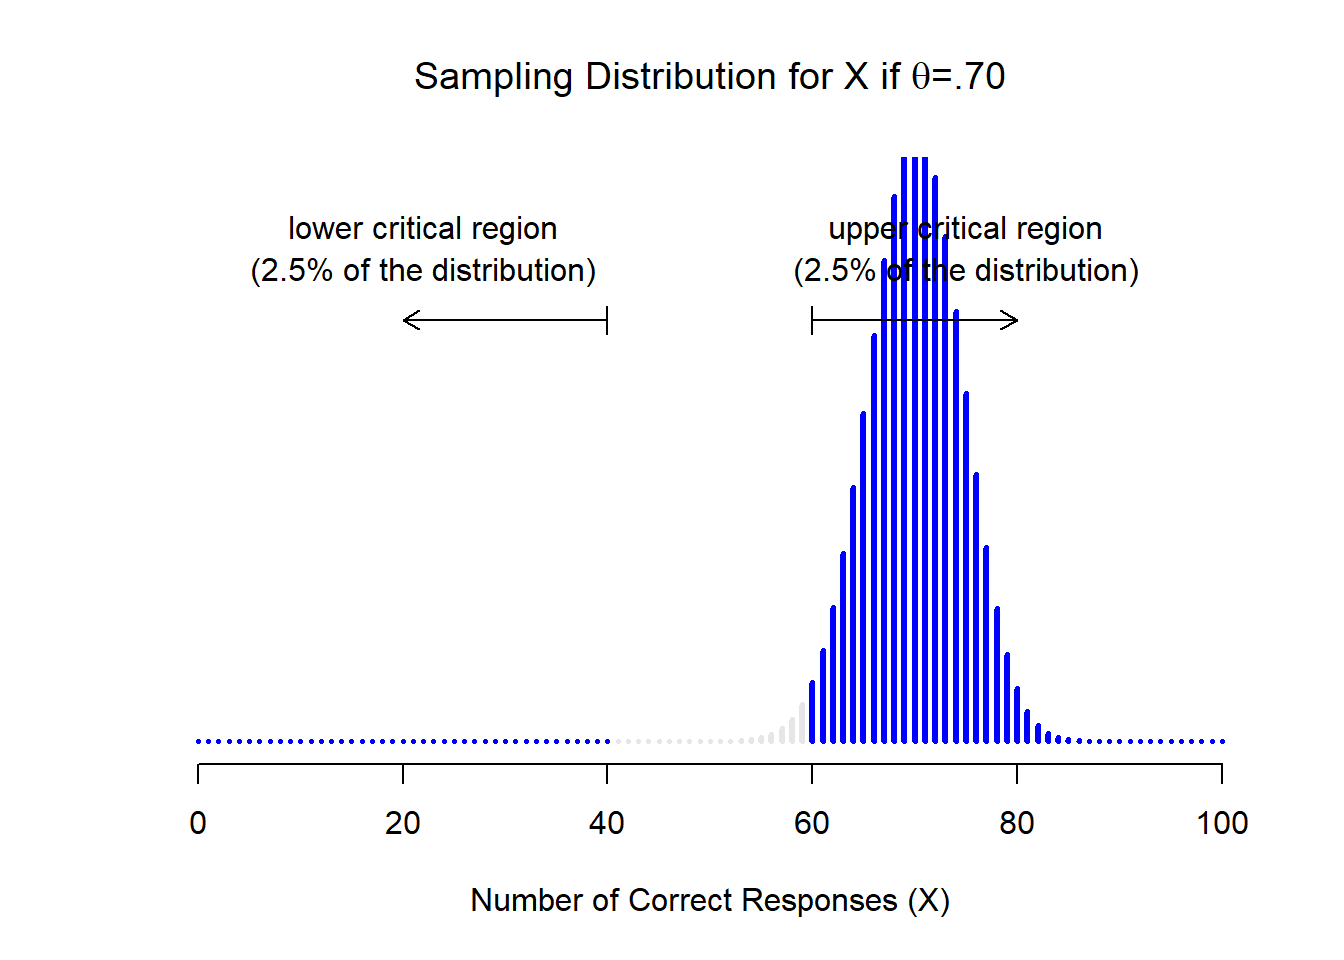 Sampling distribution under the *alternative* hypothesis, for a population parameter value of $\theta = 0.70$. Almost all of the distribution lies in the rejection region.